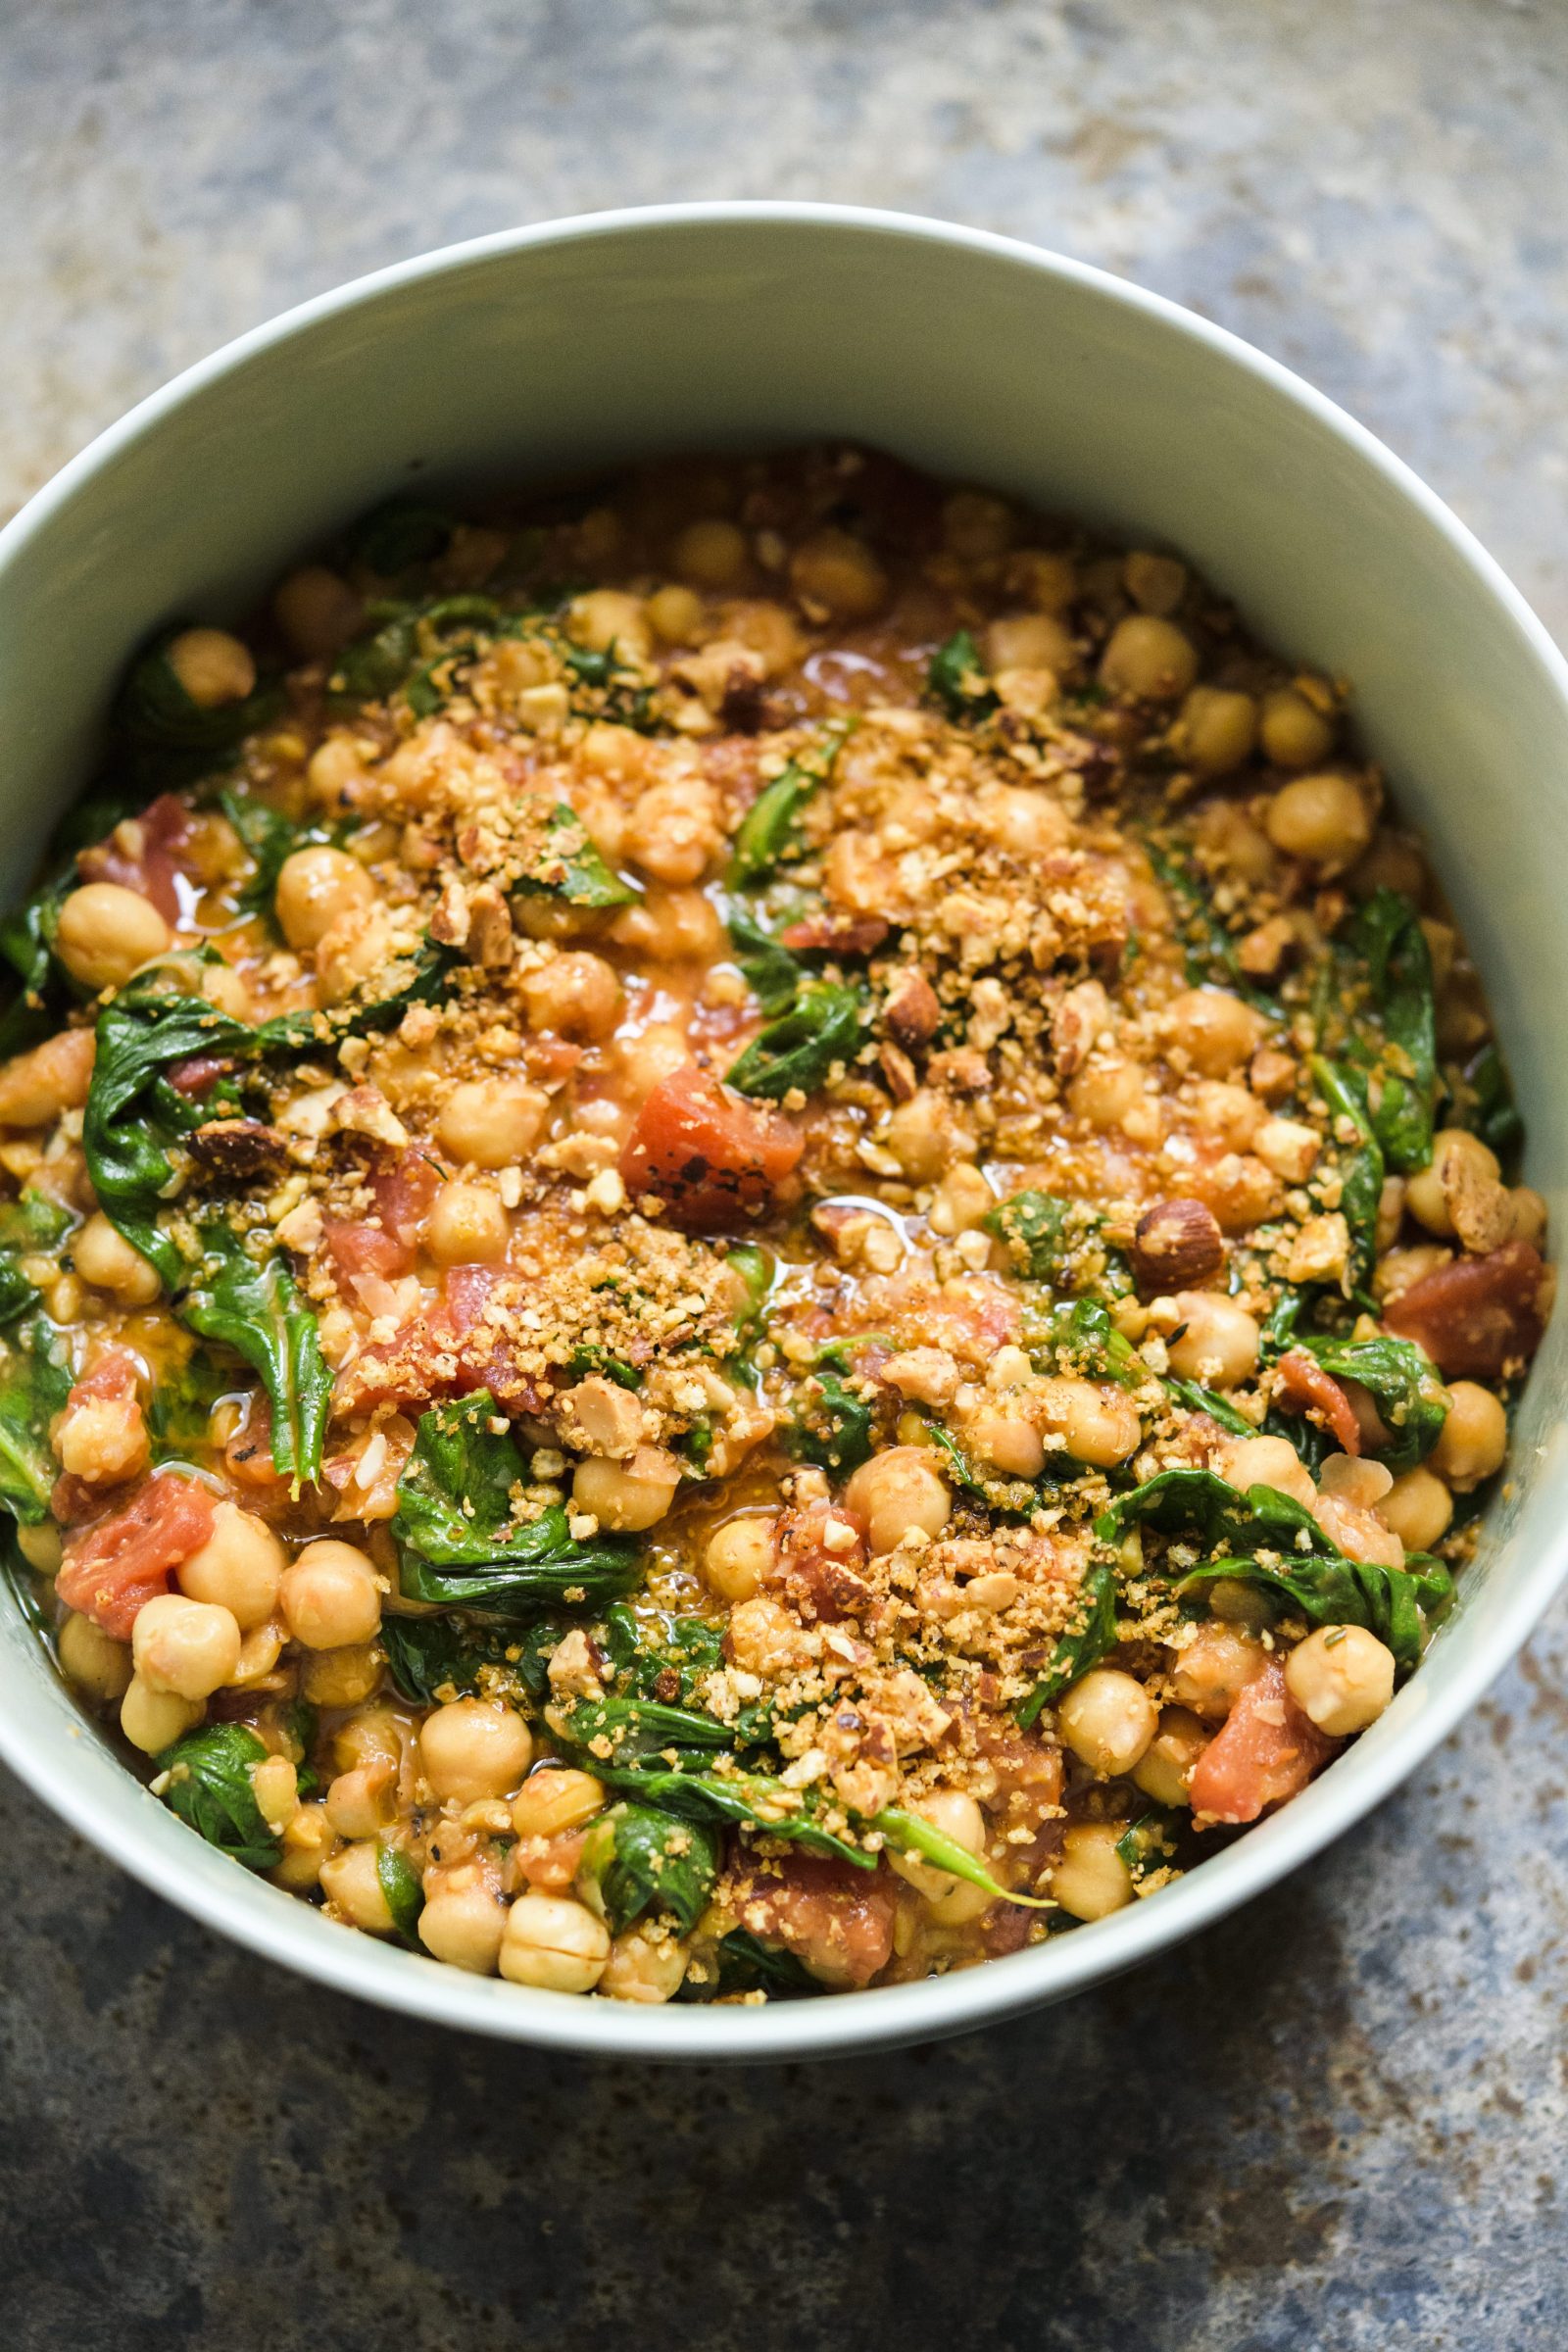 Braised Chickpeas and Spinach with Smoked Paprika and Garlic (Guisat de Cigrons)